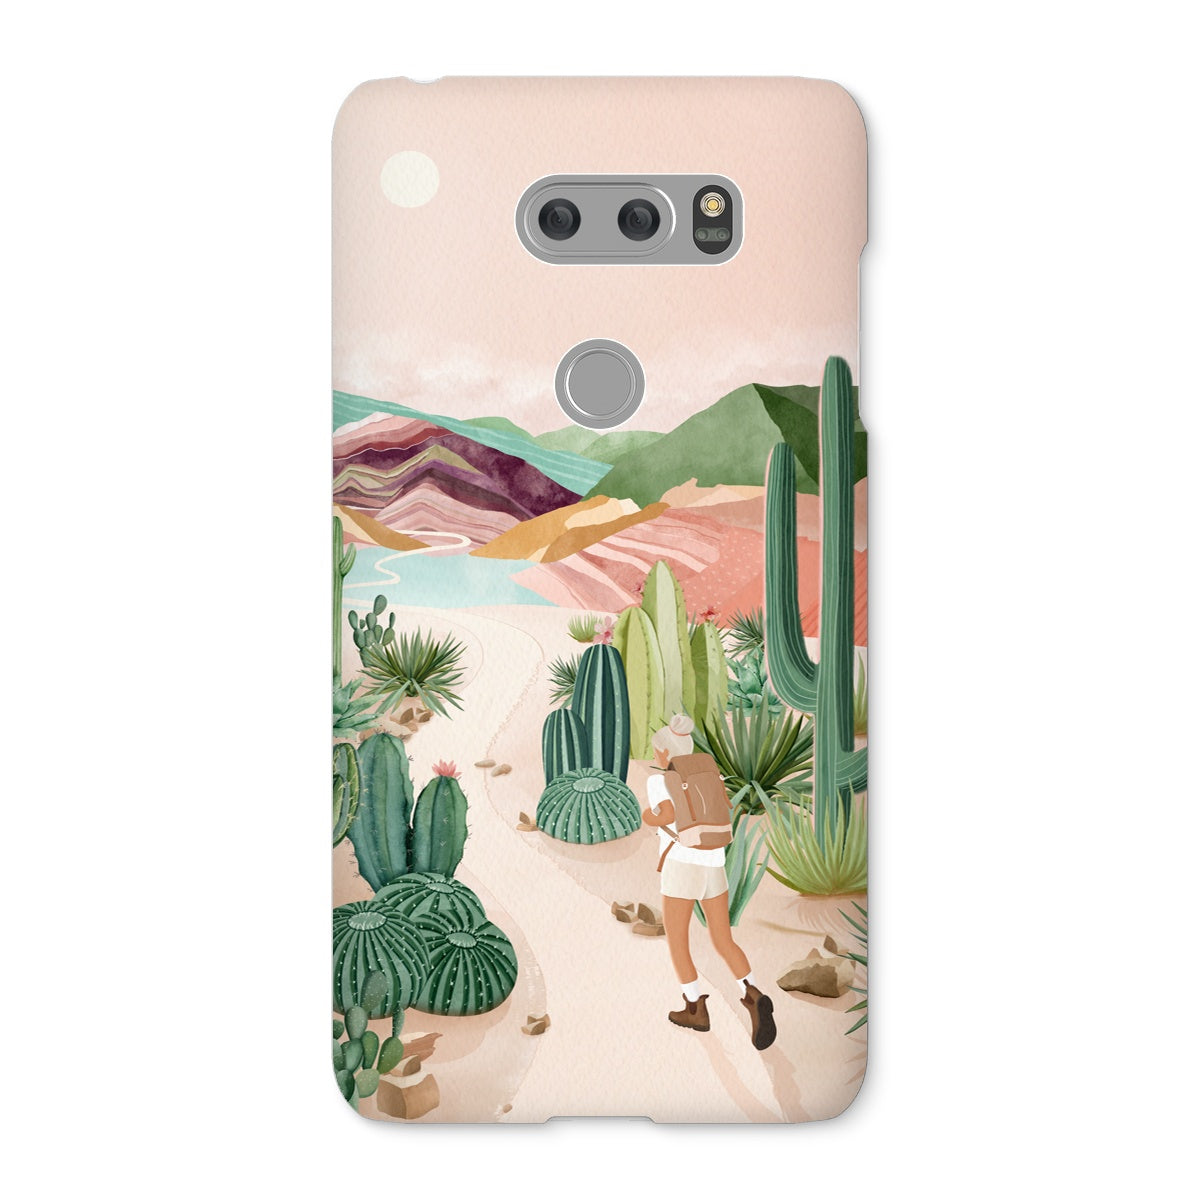 Memory of Argentina Snap Phone Case